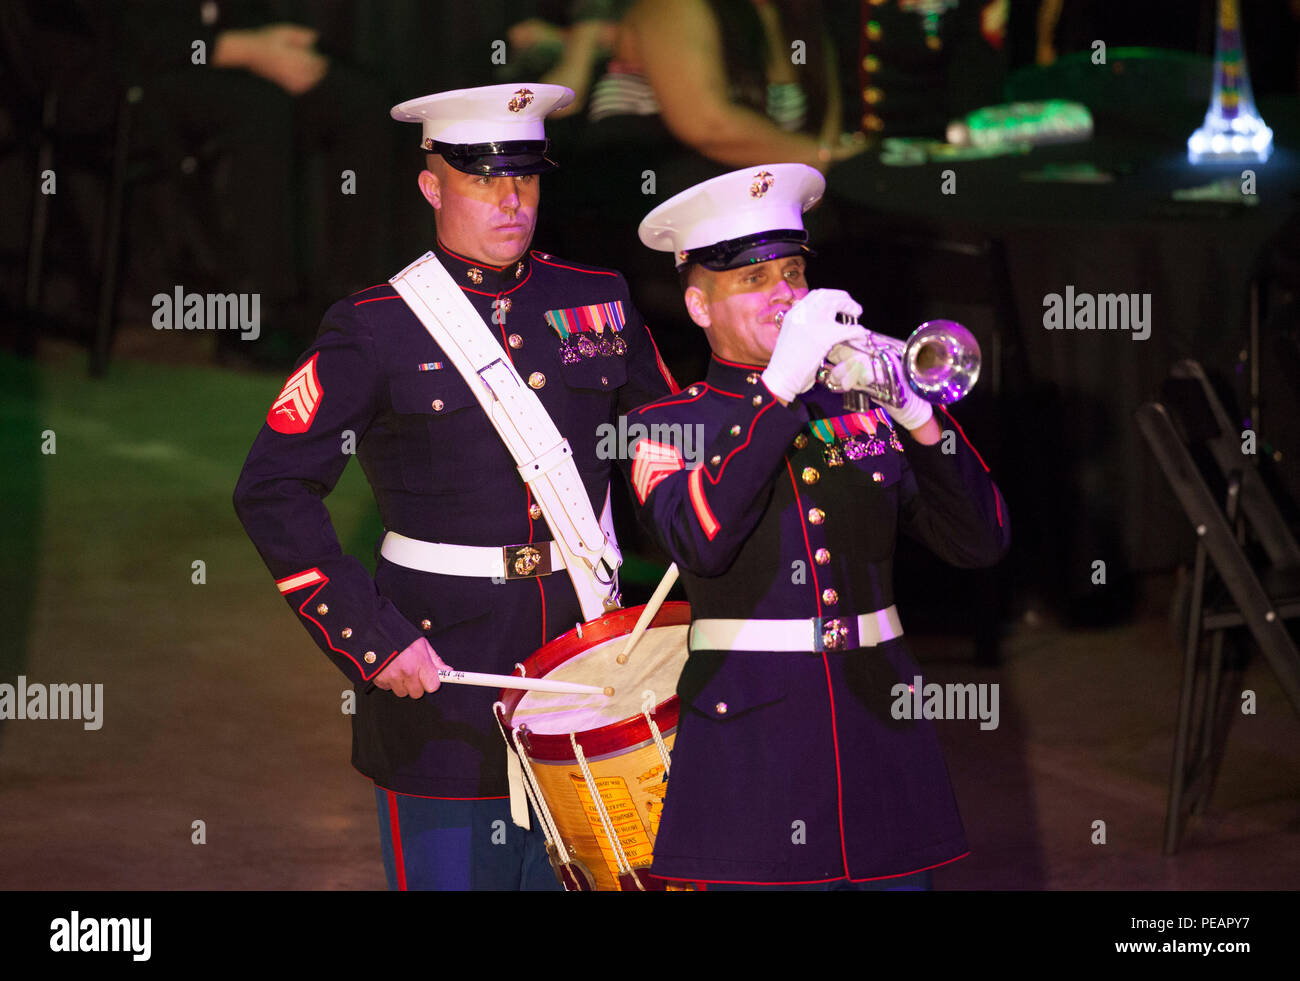 U.S. Marines Sgt. David Kelley (Left), and Sgt. Charles Mekealin (Right), with Marine Corps Band New Orleans perform for the celebration of the 240th Marine Corps Birthday Ball at Mardi Gras World, New Orleans, La., Nov. 21, 2015. This year’s celebration honors those past, present, and future Marines throughout history and marks the 240th Marine Corps Birthday since its founding on Nov. 10, 1775. (U.S. Marine Corps photo by Kimberly Aguirre/Released) Stock Photo